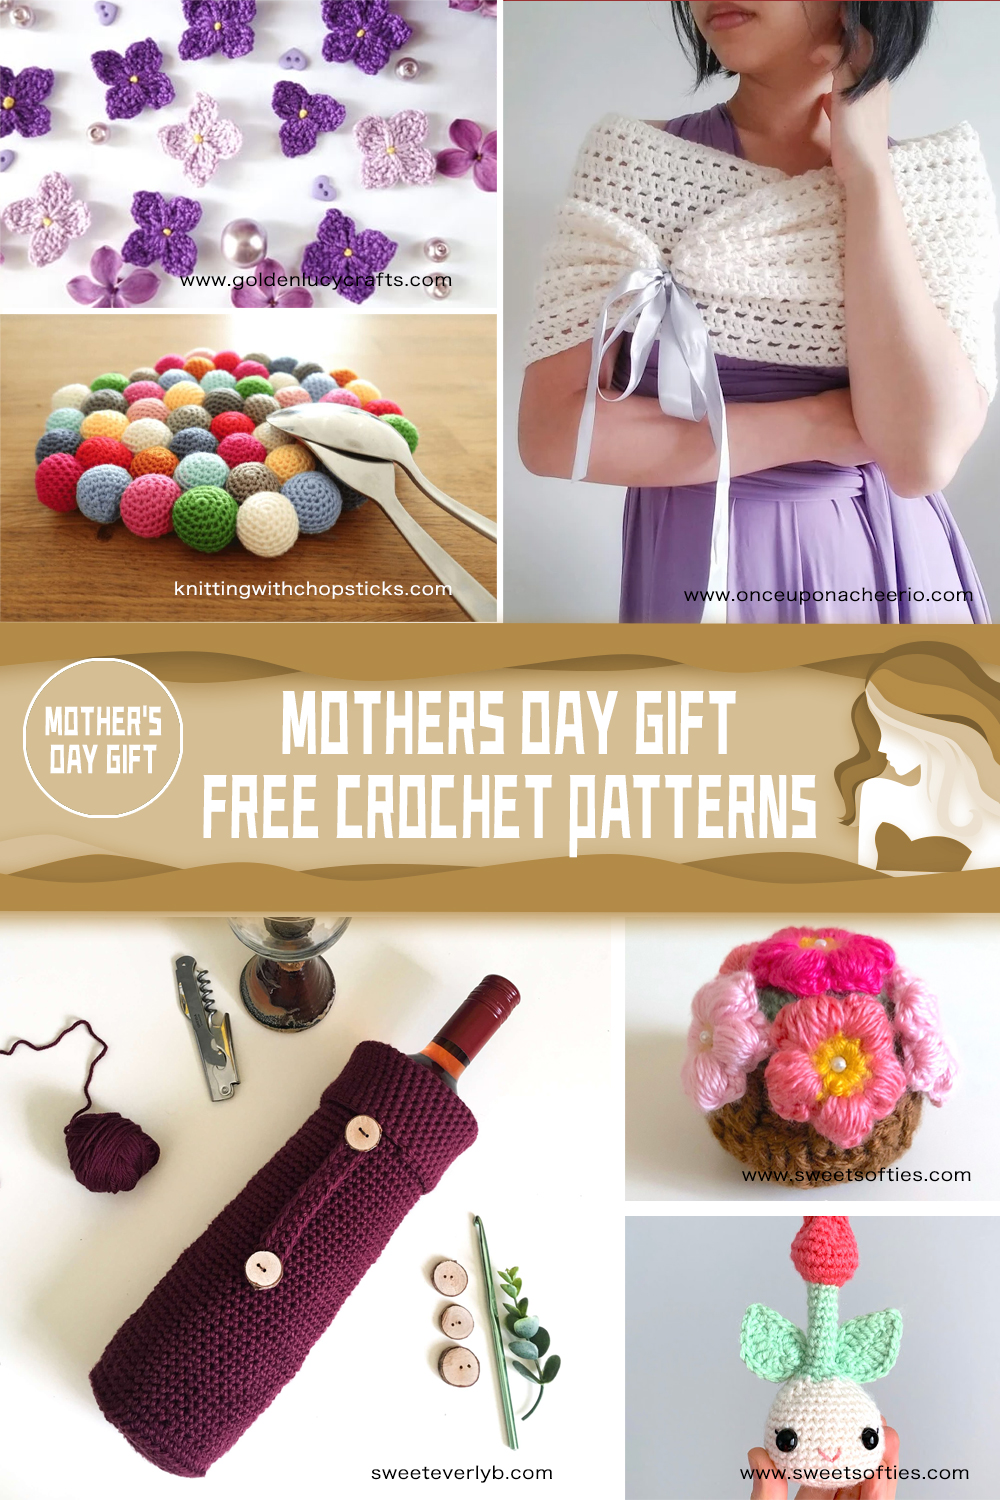 FREE Mother's Day Gift Crochet Patterns